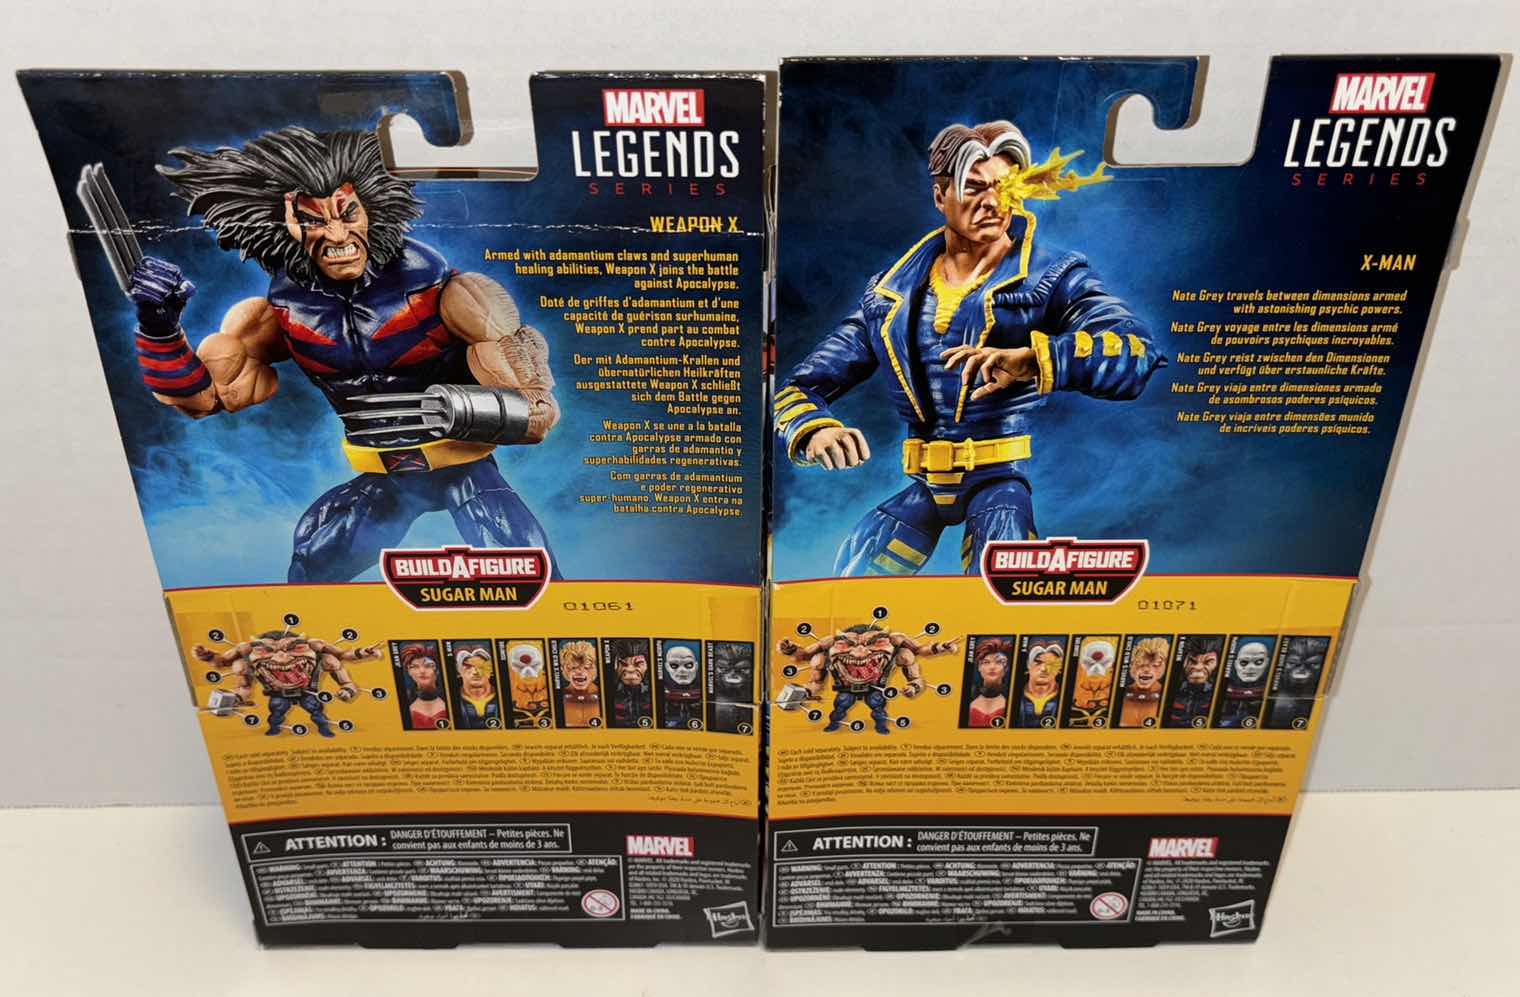 Photo 3 of NEW HASBRO MARVEL LEGENDS SERIES X-MEN THE AGE OF APOCALYPSE “WEAPON X” & “X-MAN” ACTION FIGURE & ACCESSORIES 2-PACK BUNDLE